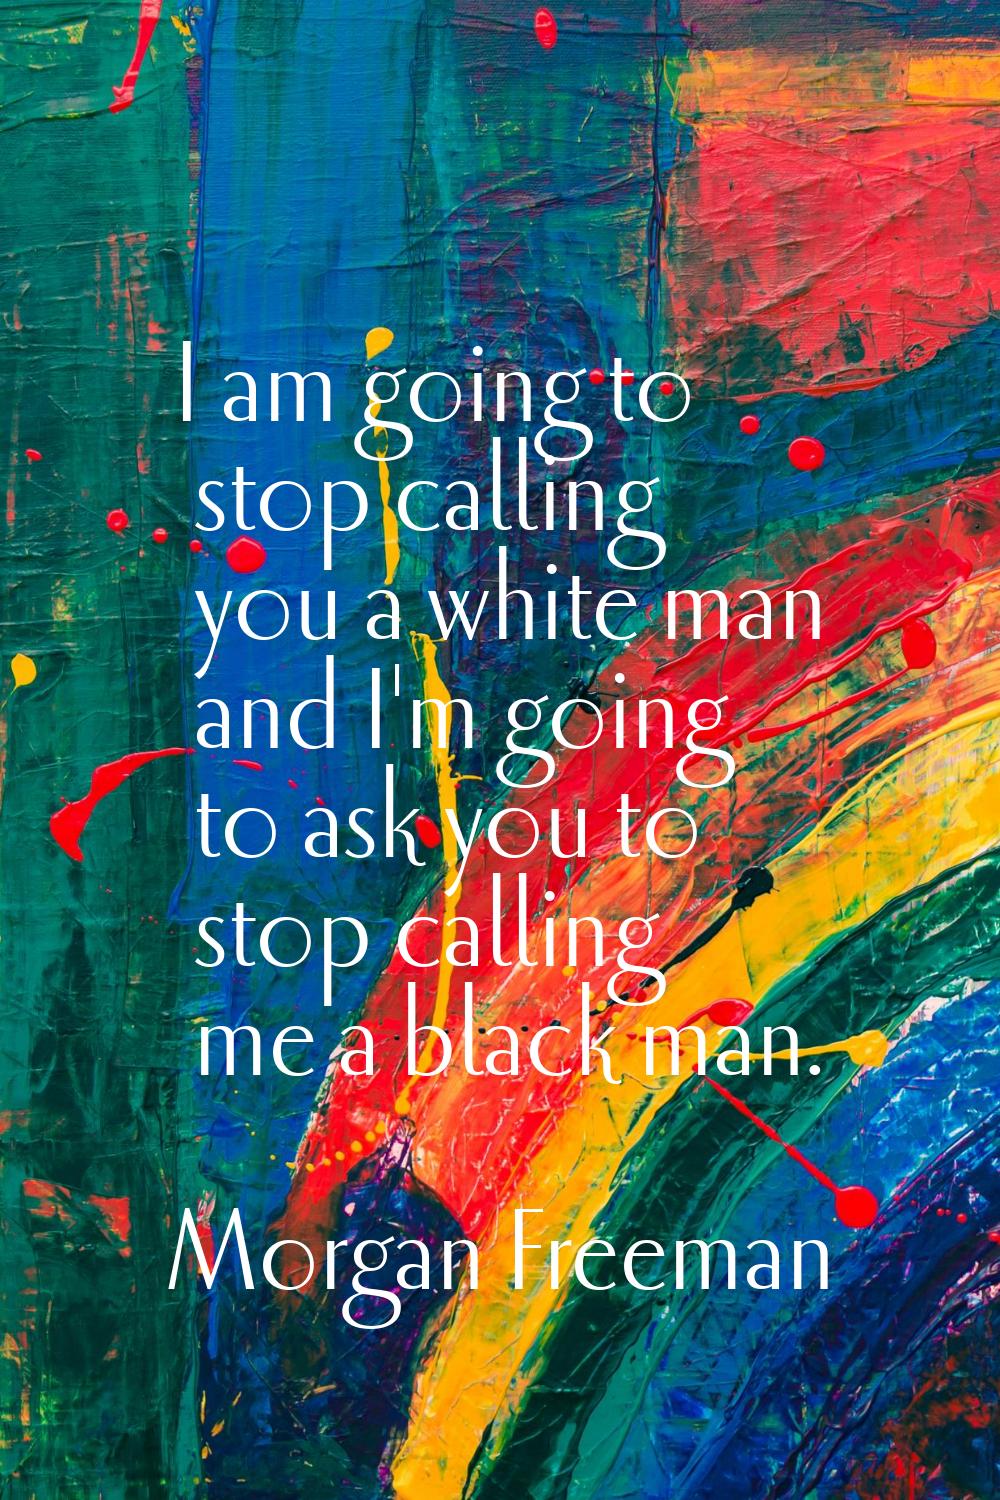 I am going to stop calling you a white man and I'm going to ask you to stop calling me a black man.